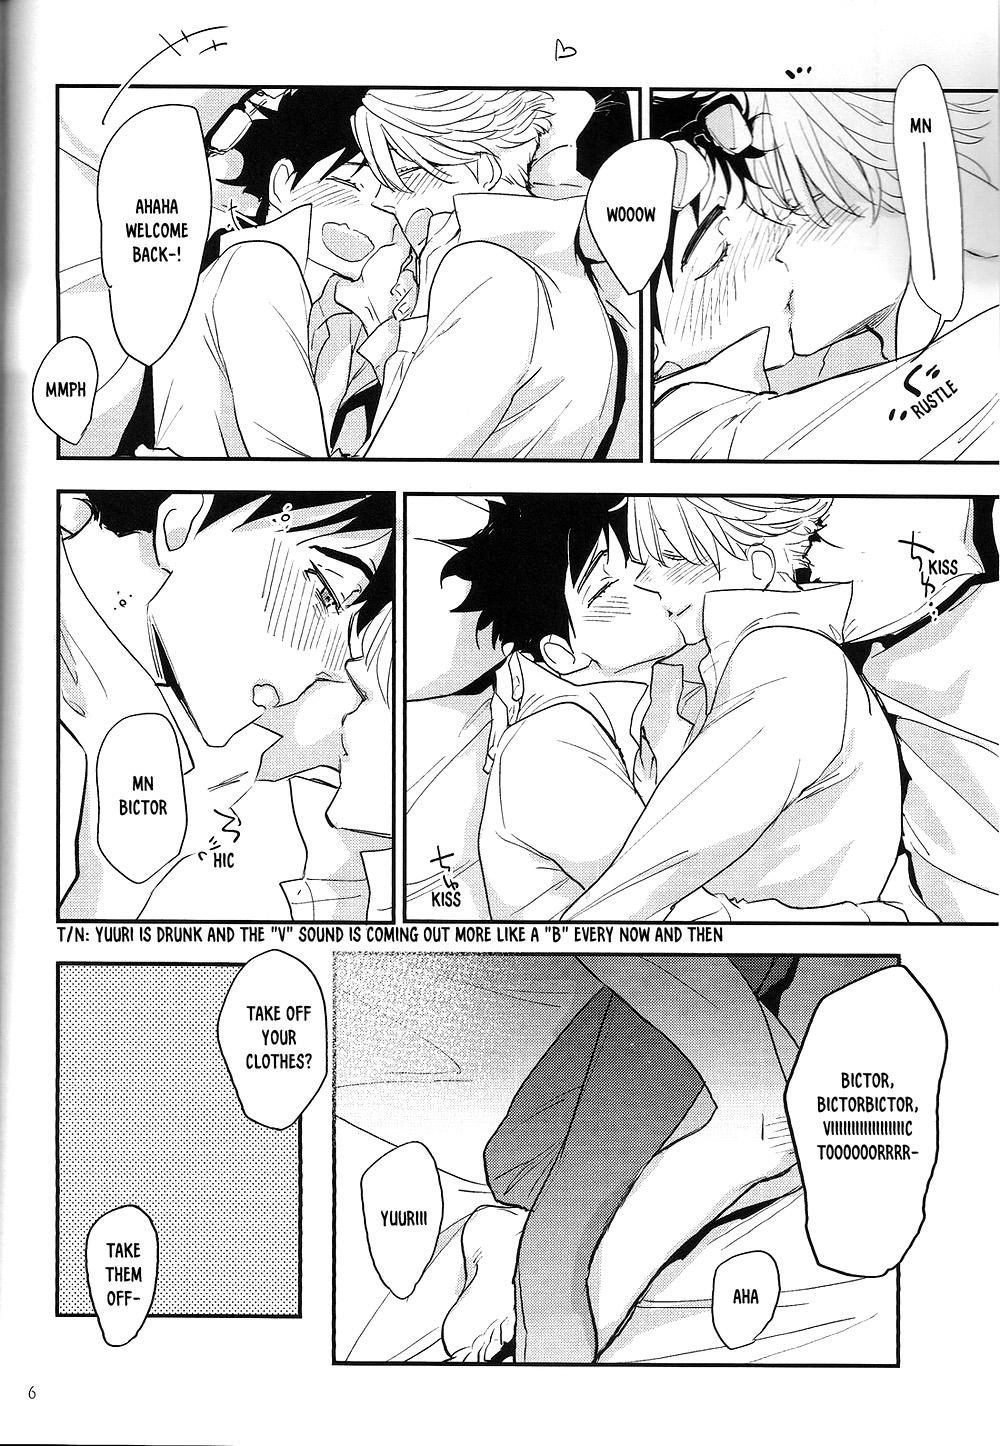 Squirting After banquet! - Yuri on ice Hair - Page 5